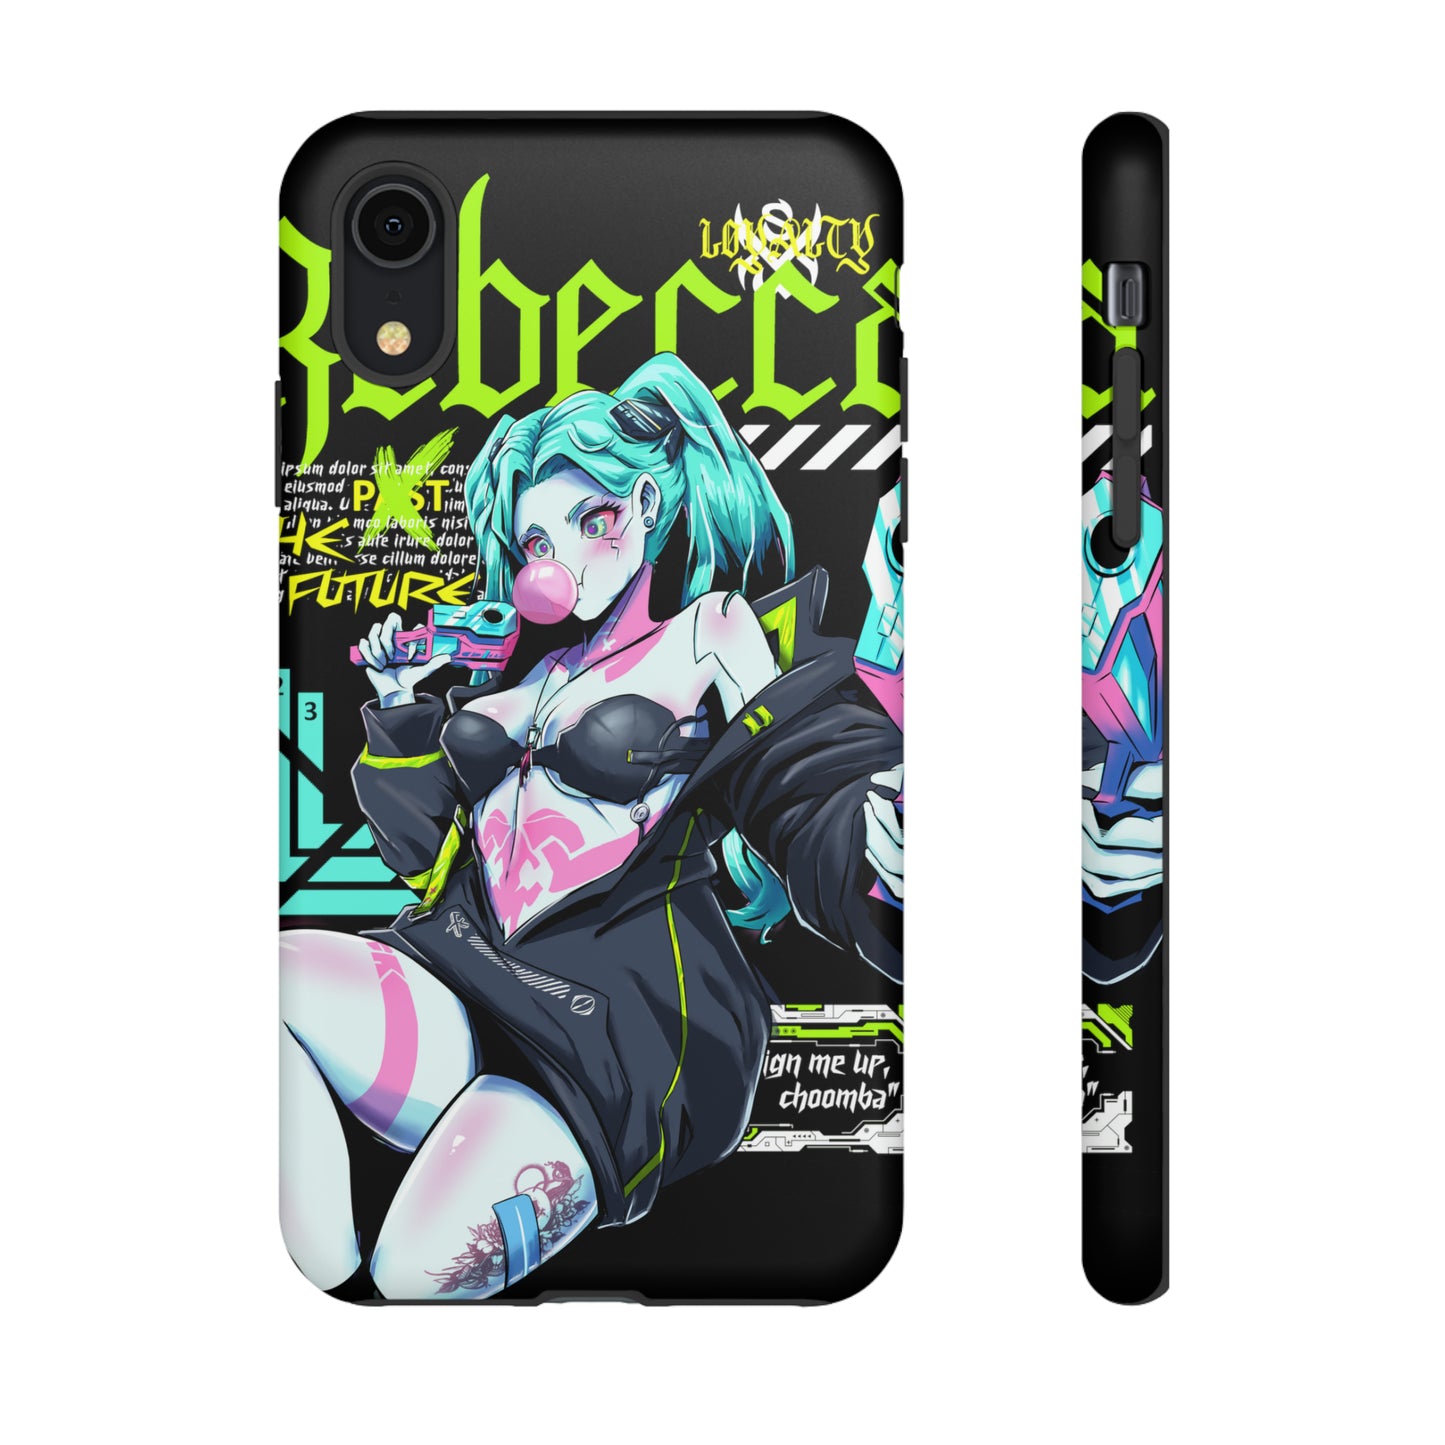 Rebecca / iPhone Cases - LIMITED